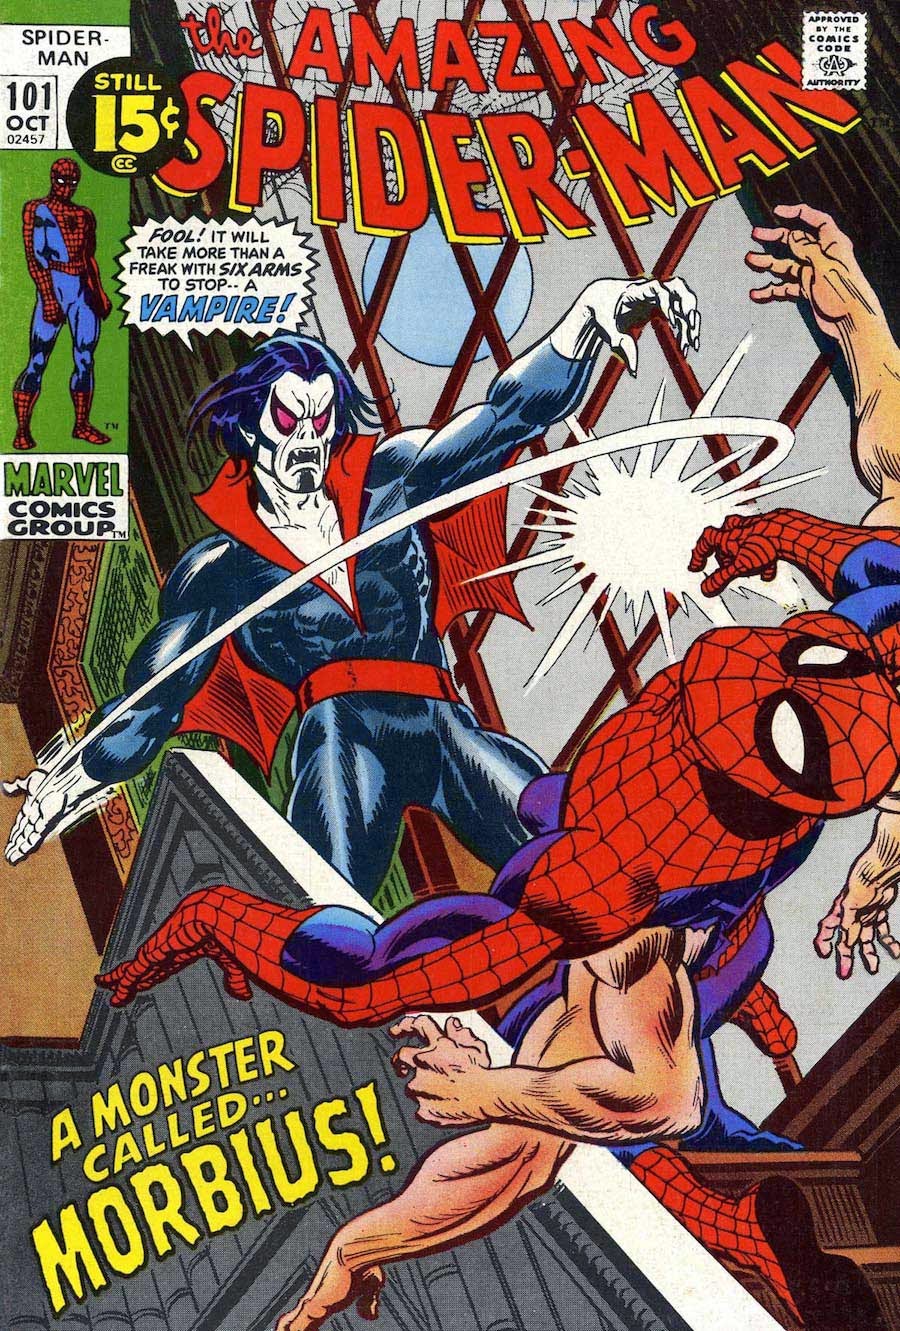 Amazing Spider-Man #101 key issue marvel 1970s bronze age comic book cover - 1st appearance Morbius